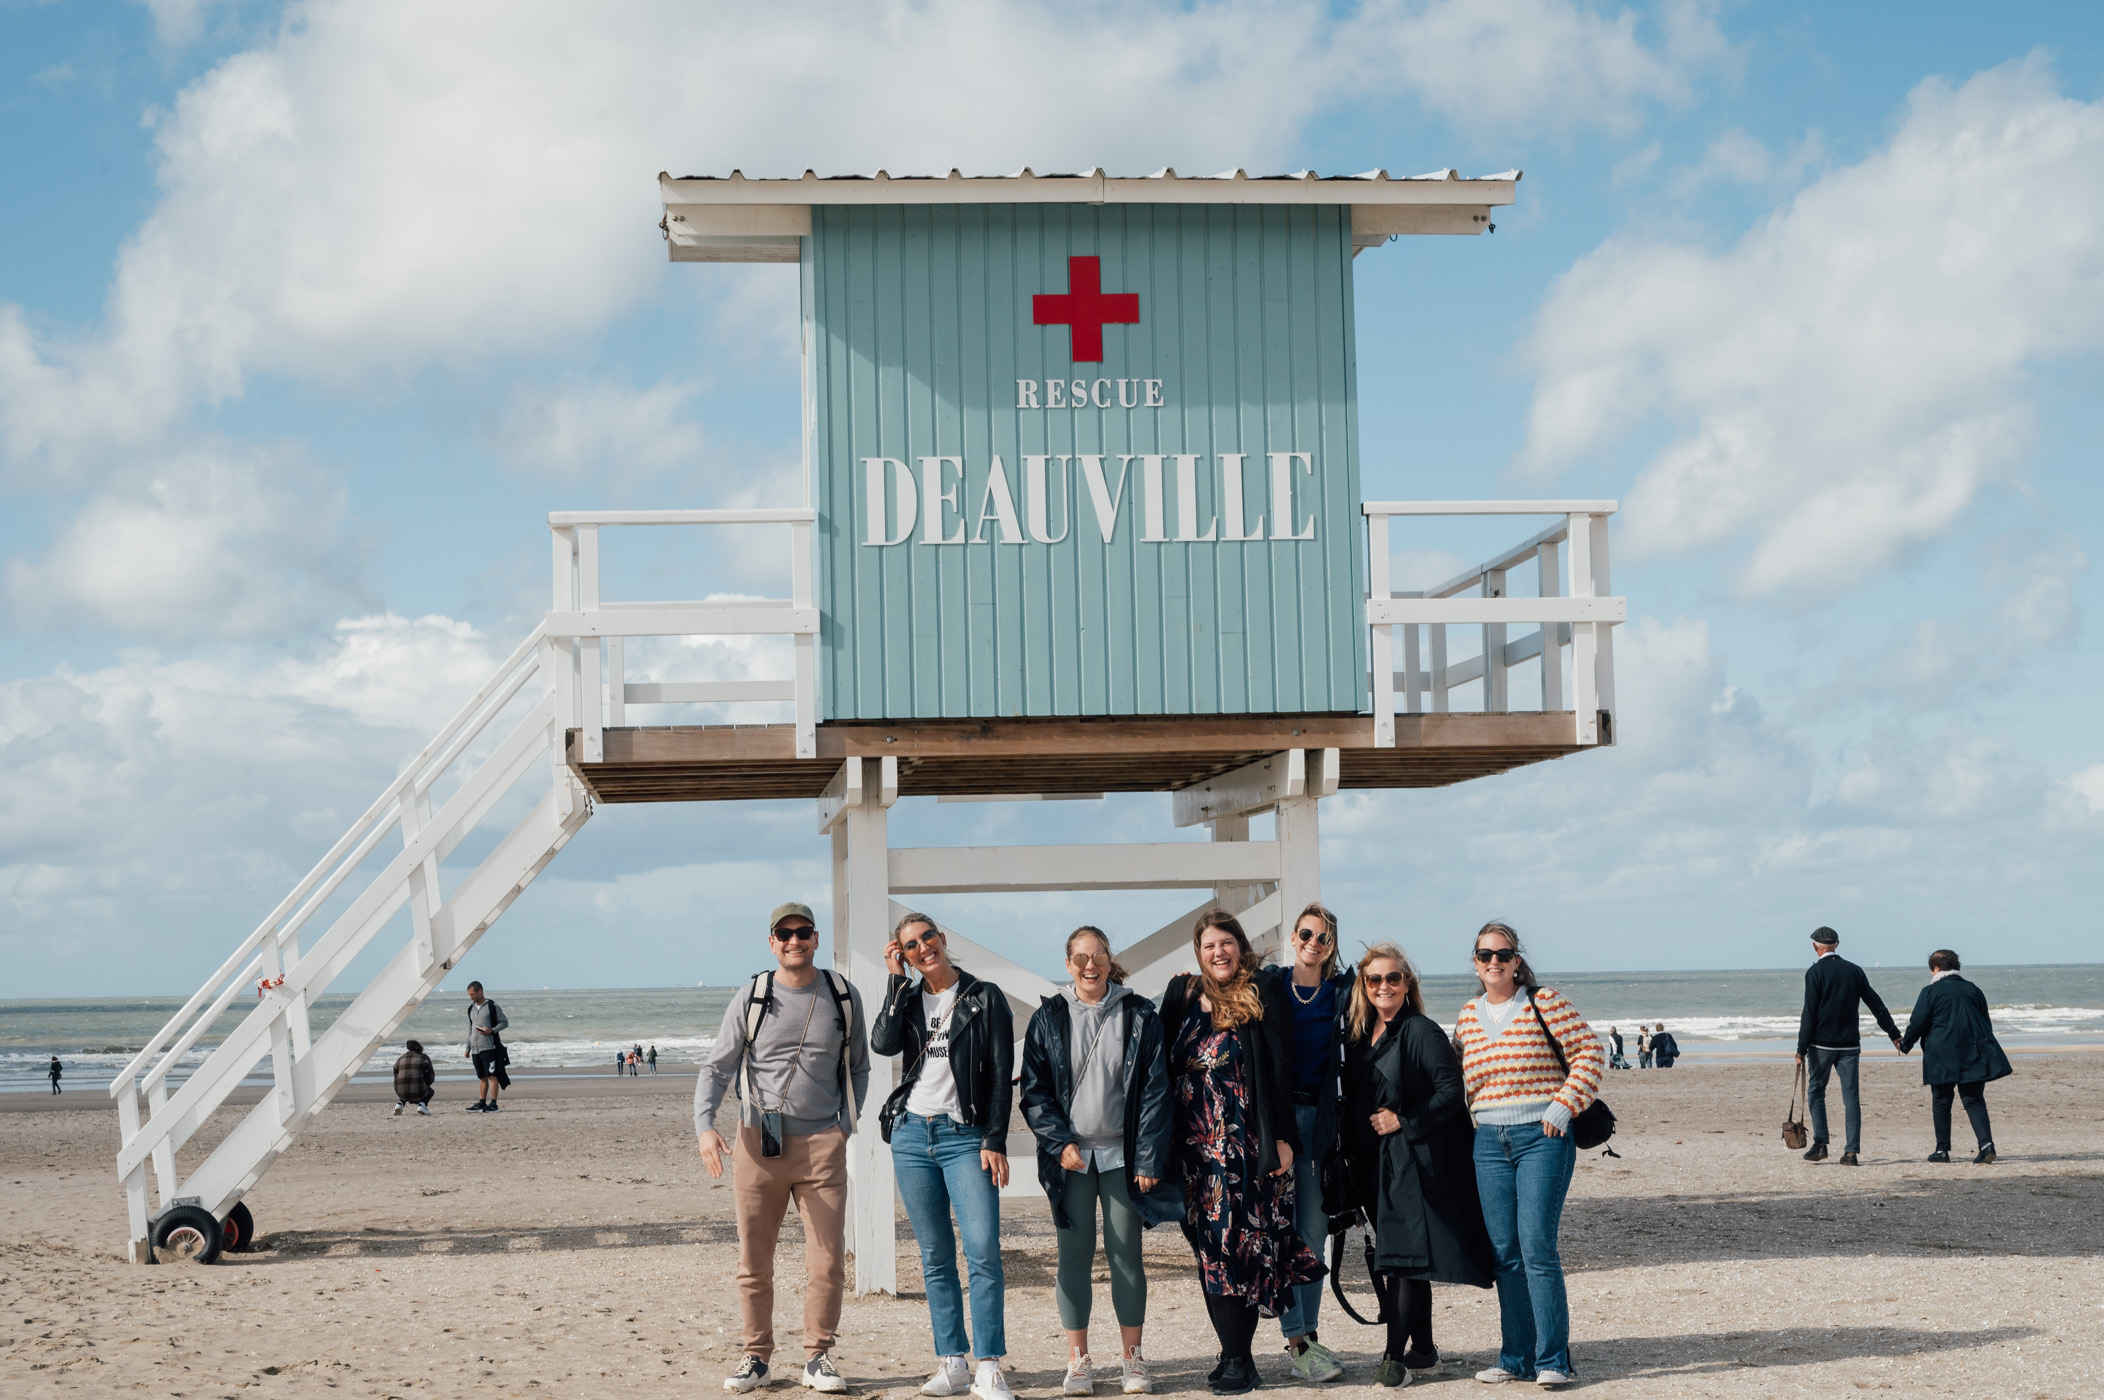 Our travel group through Normandy